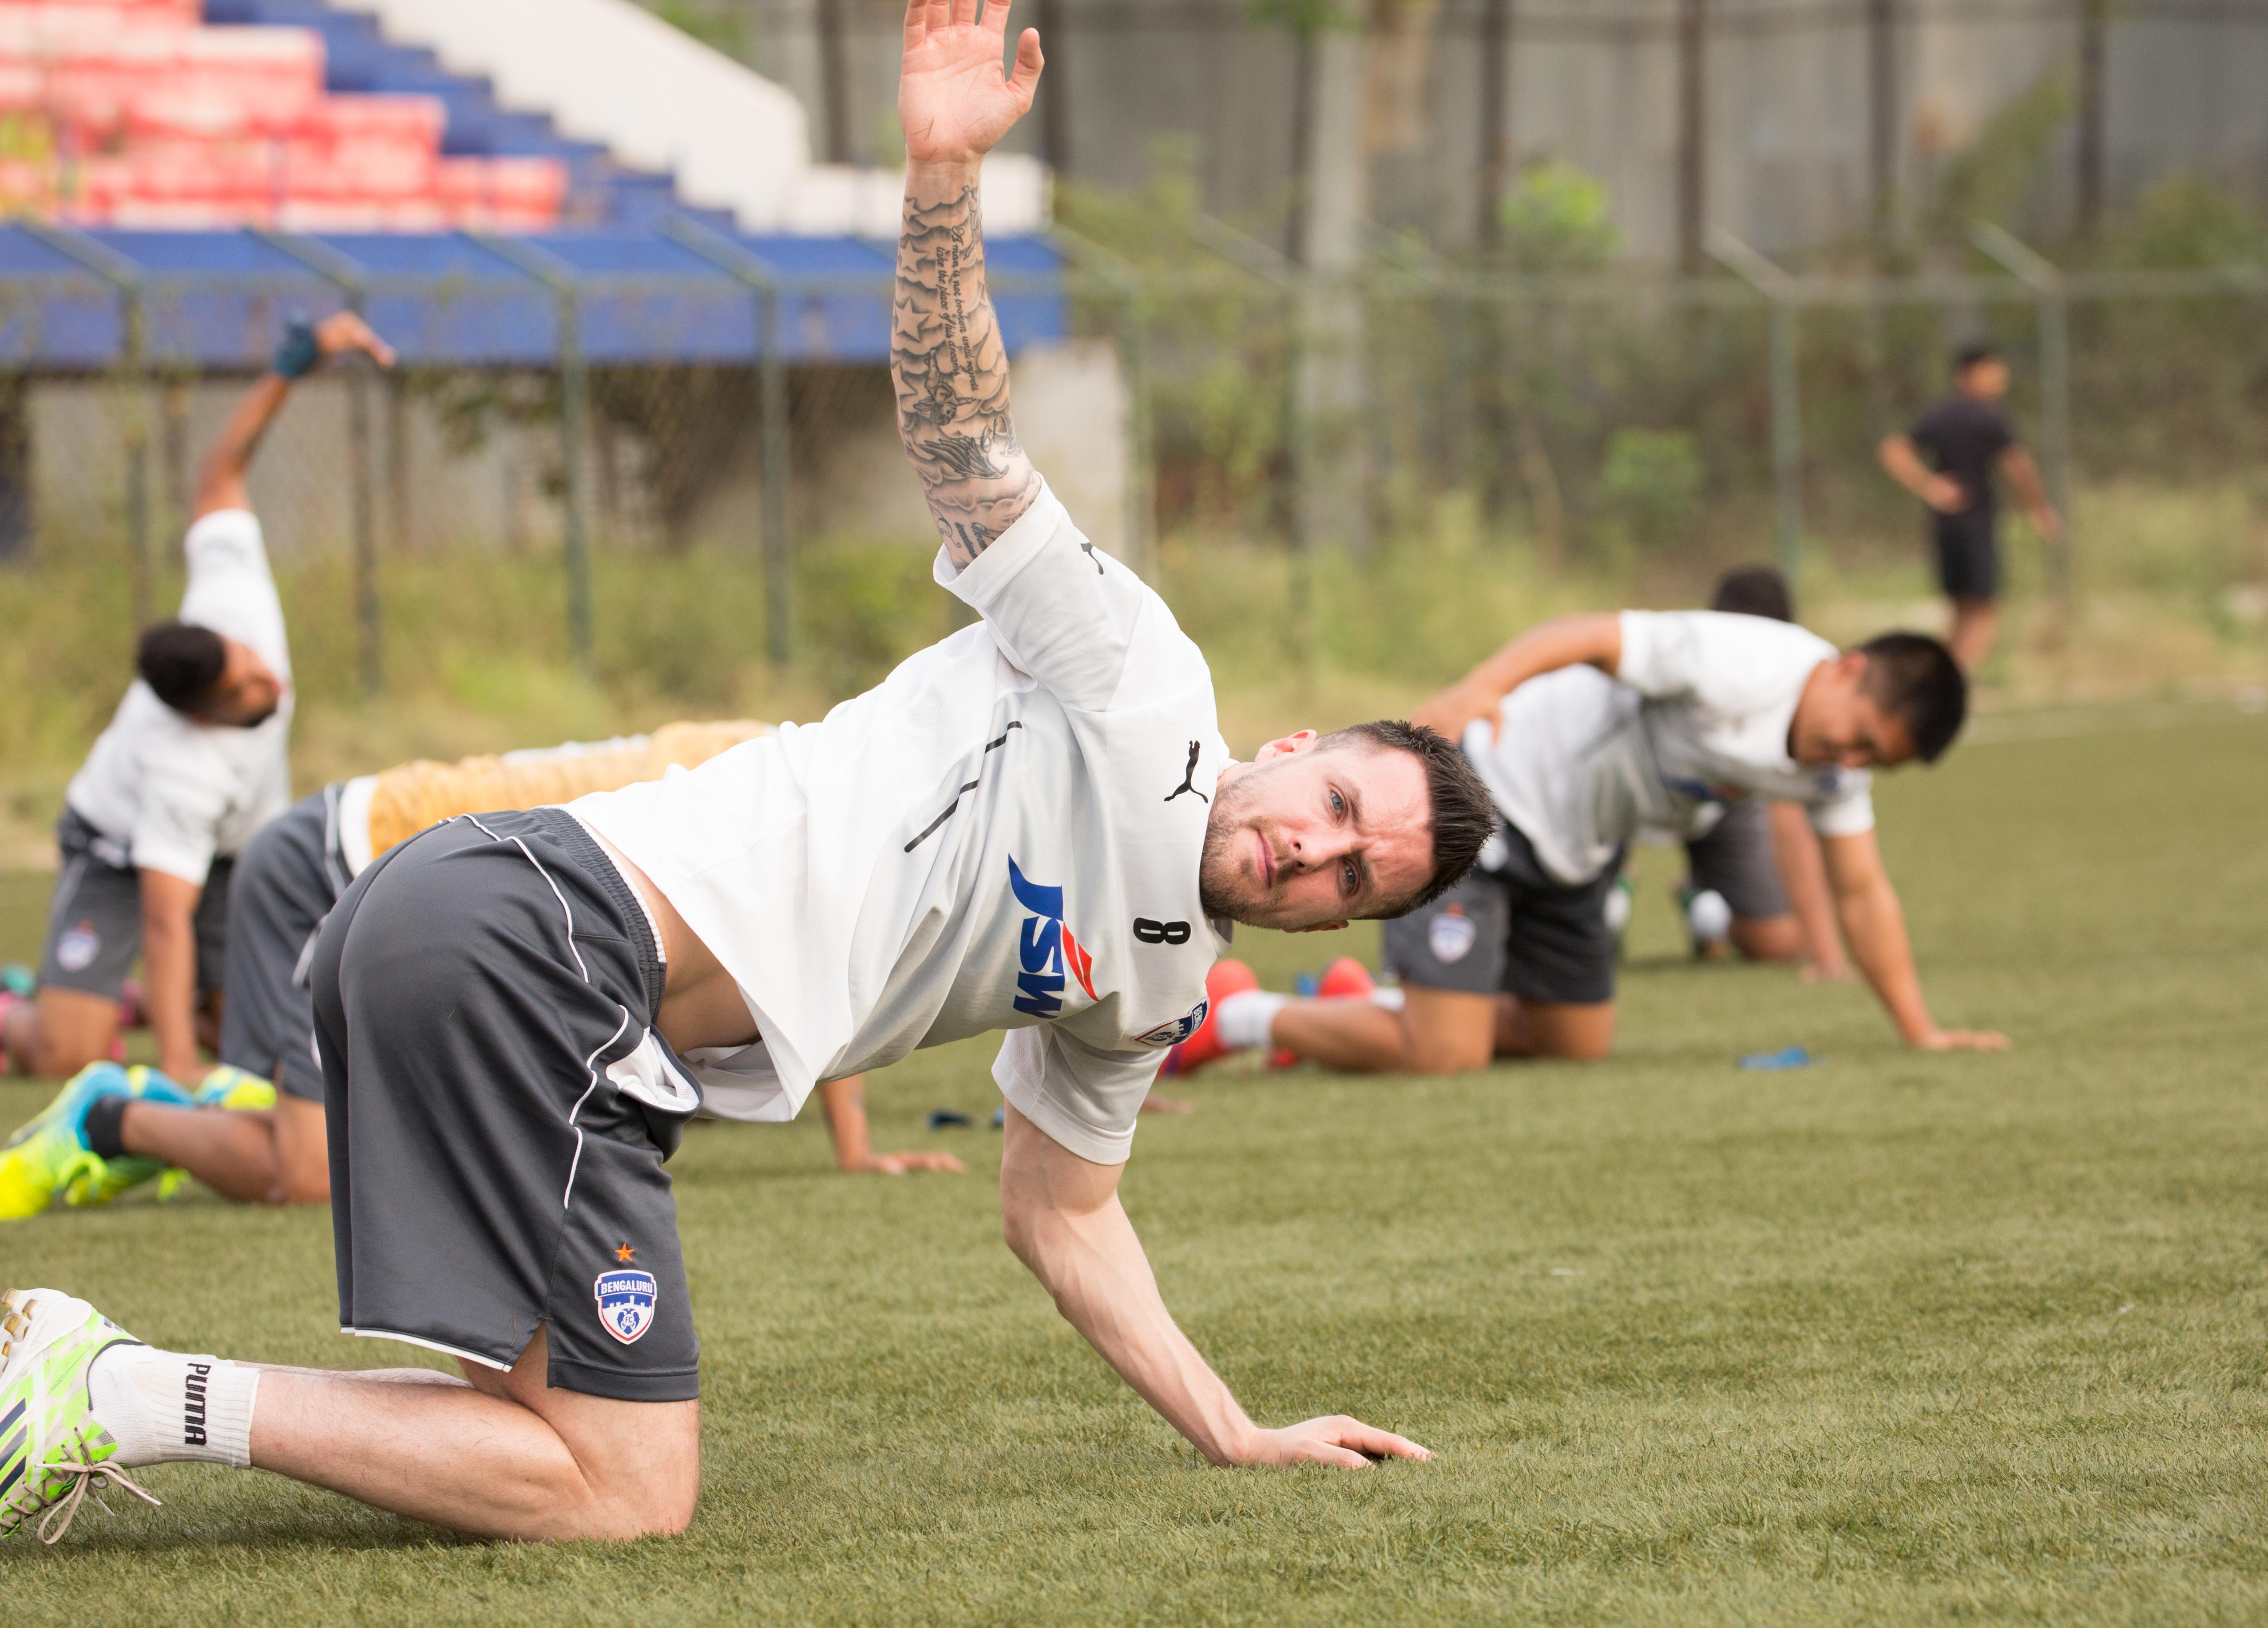 I-League 2015/16 - Preview: Bengaluru keen on positive show against Aizawl